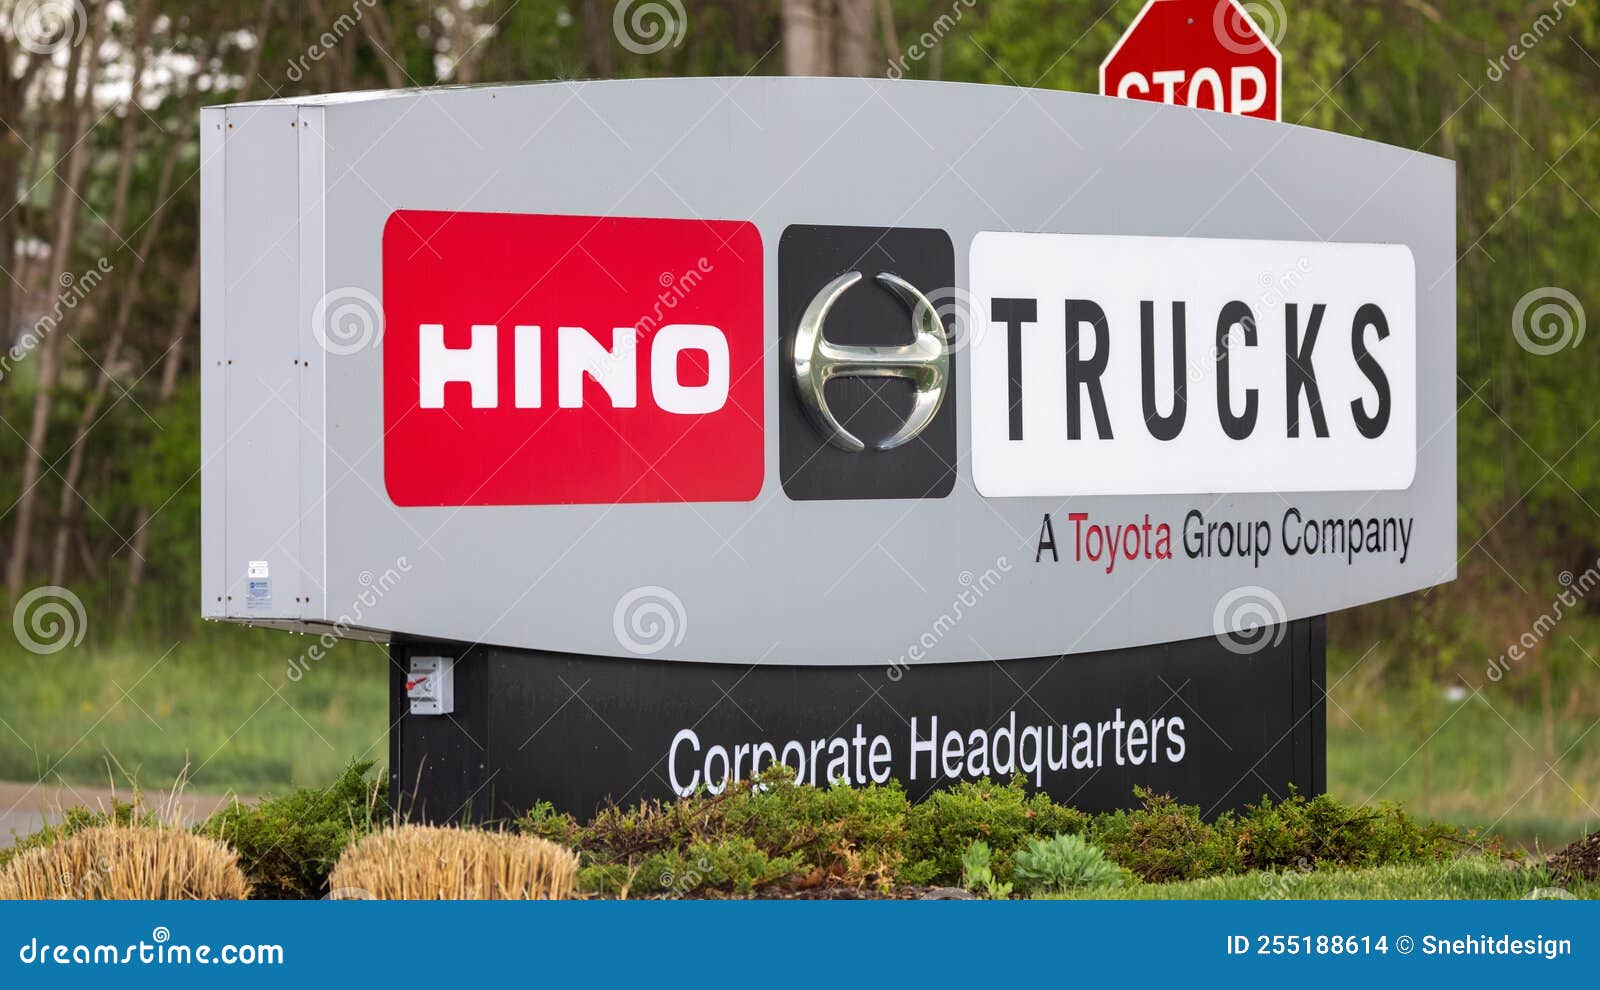 Hino Trucks Ltd is a Japanese Manufacturer of Commercial Vehicles and ...